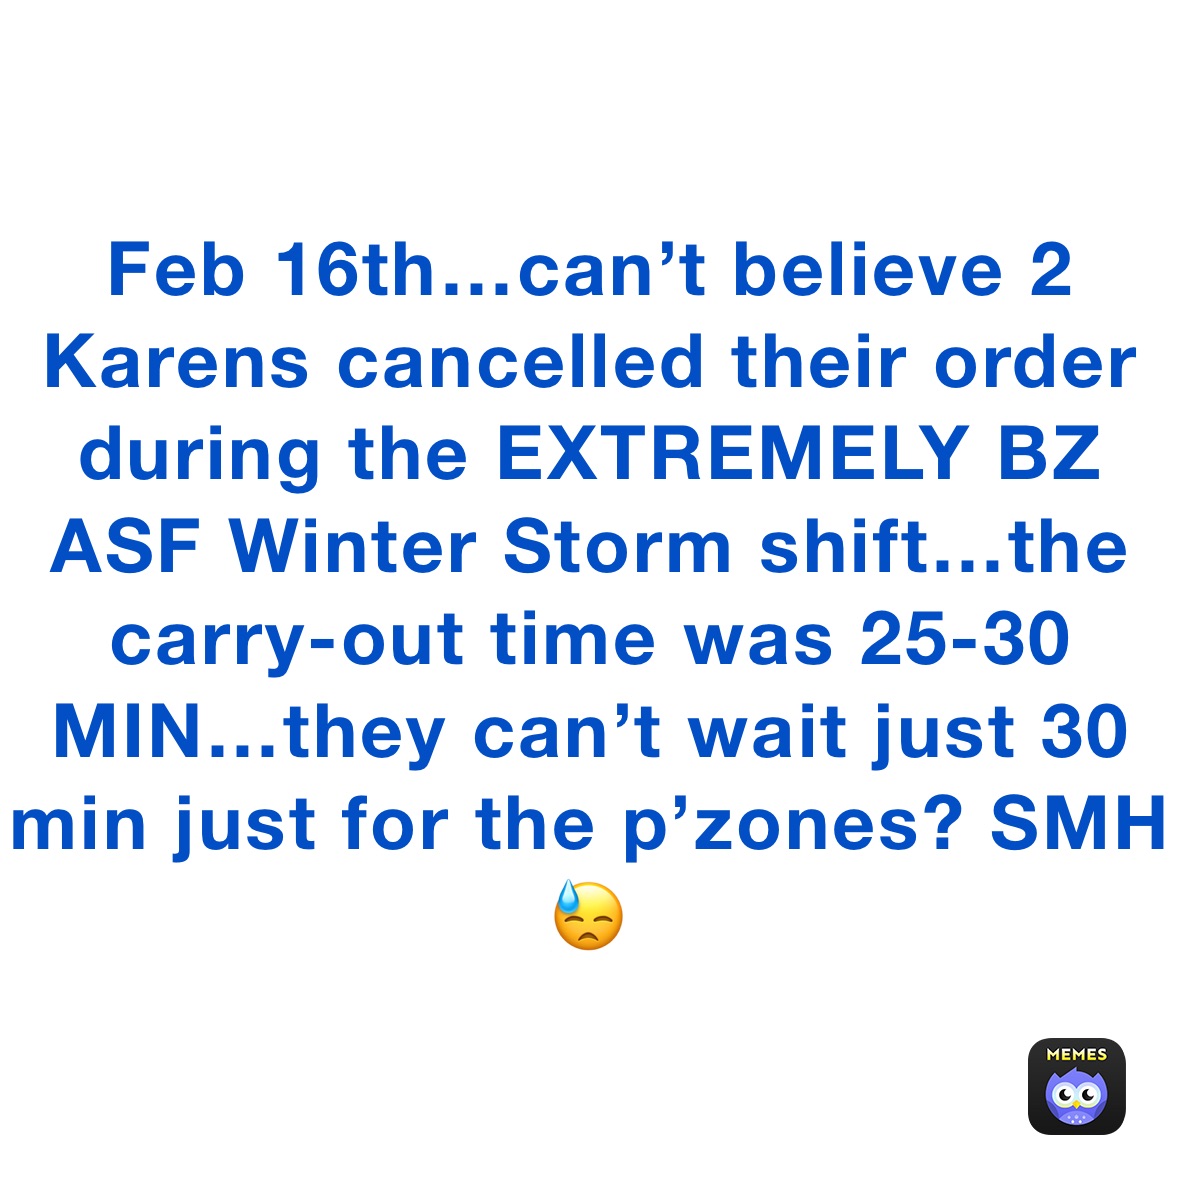 Feb 16th…can’t believe 2 Karens cancelled their order during the EXTREMELY BZ ASF Winter Storm shift…the carry-out time was 25-30 MIN…they can’t wait just 30 min just for the p’zones? SMH😓